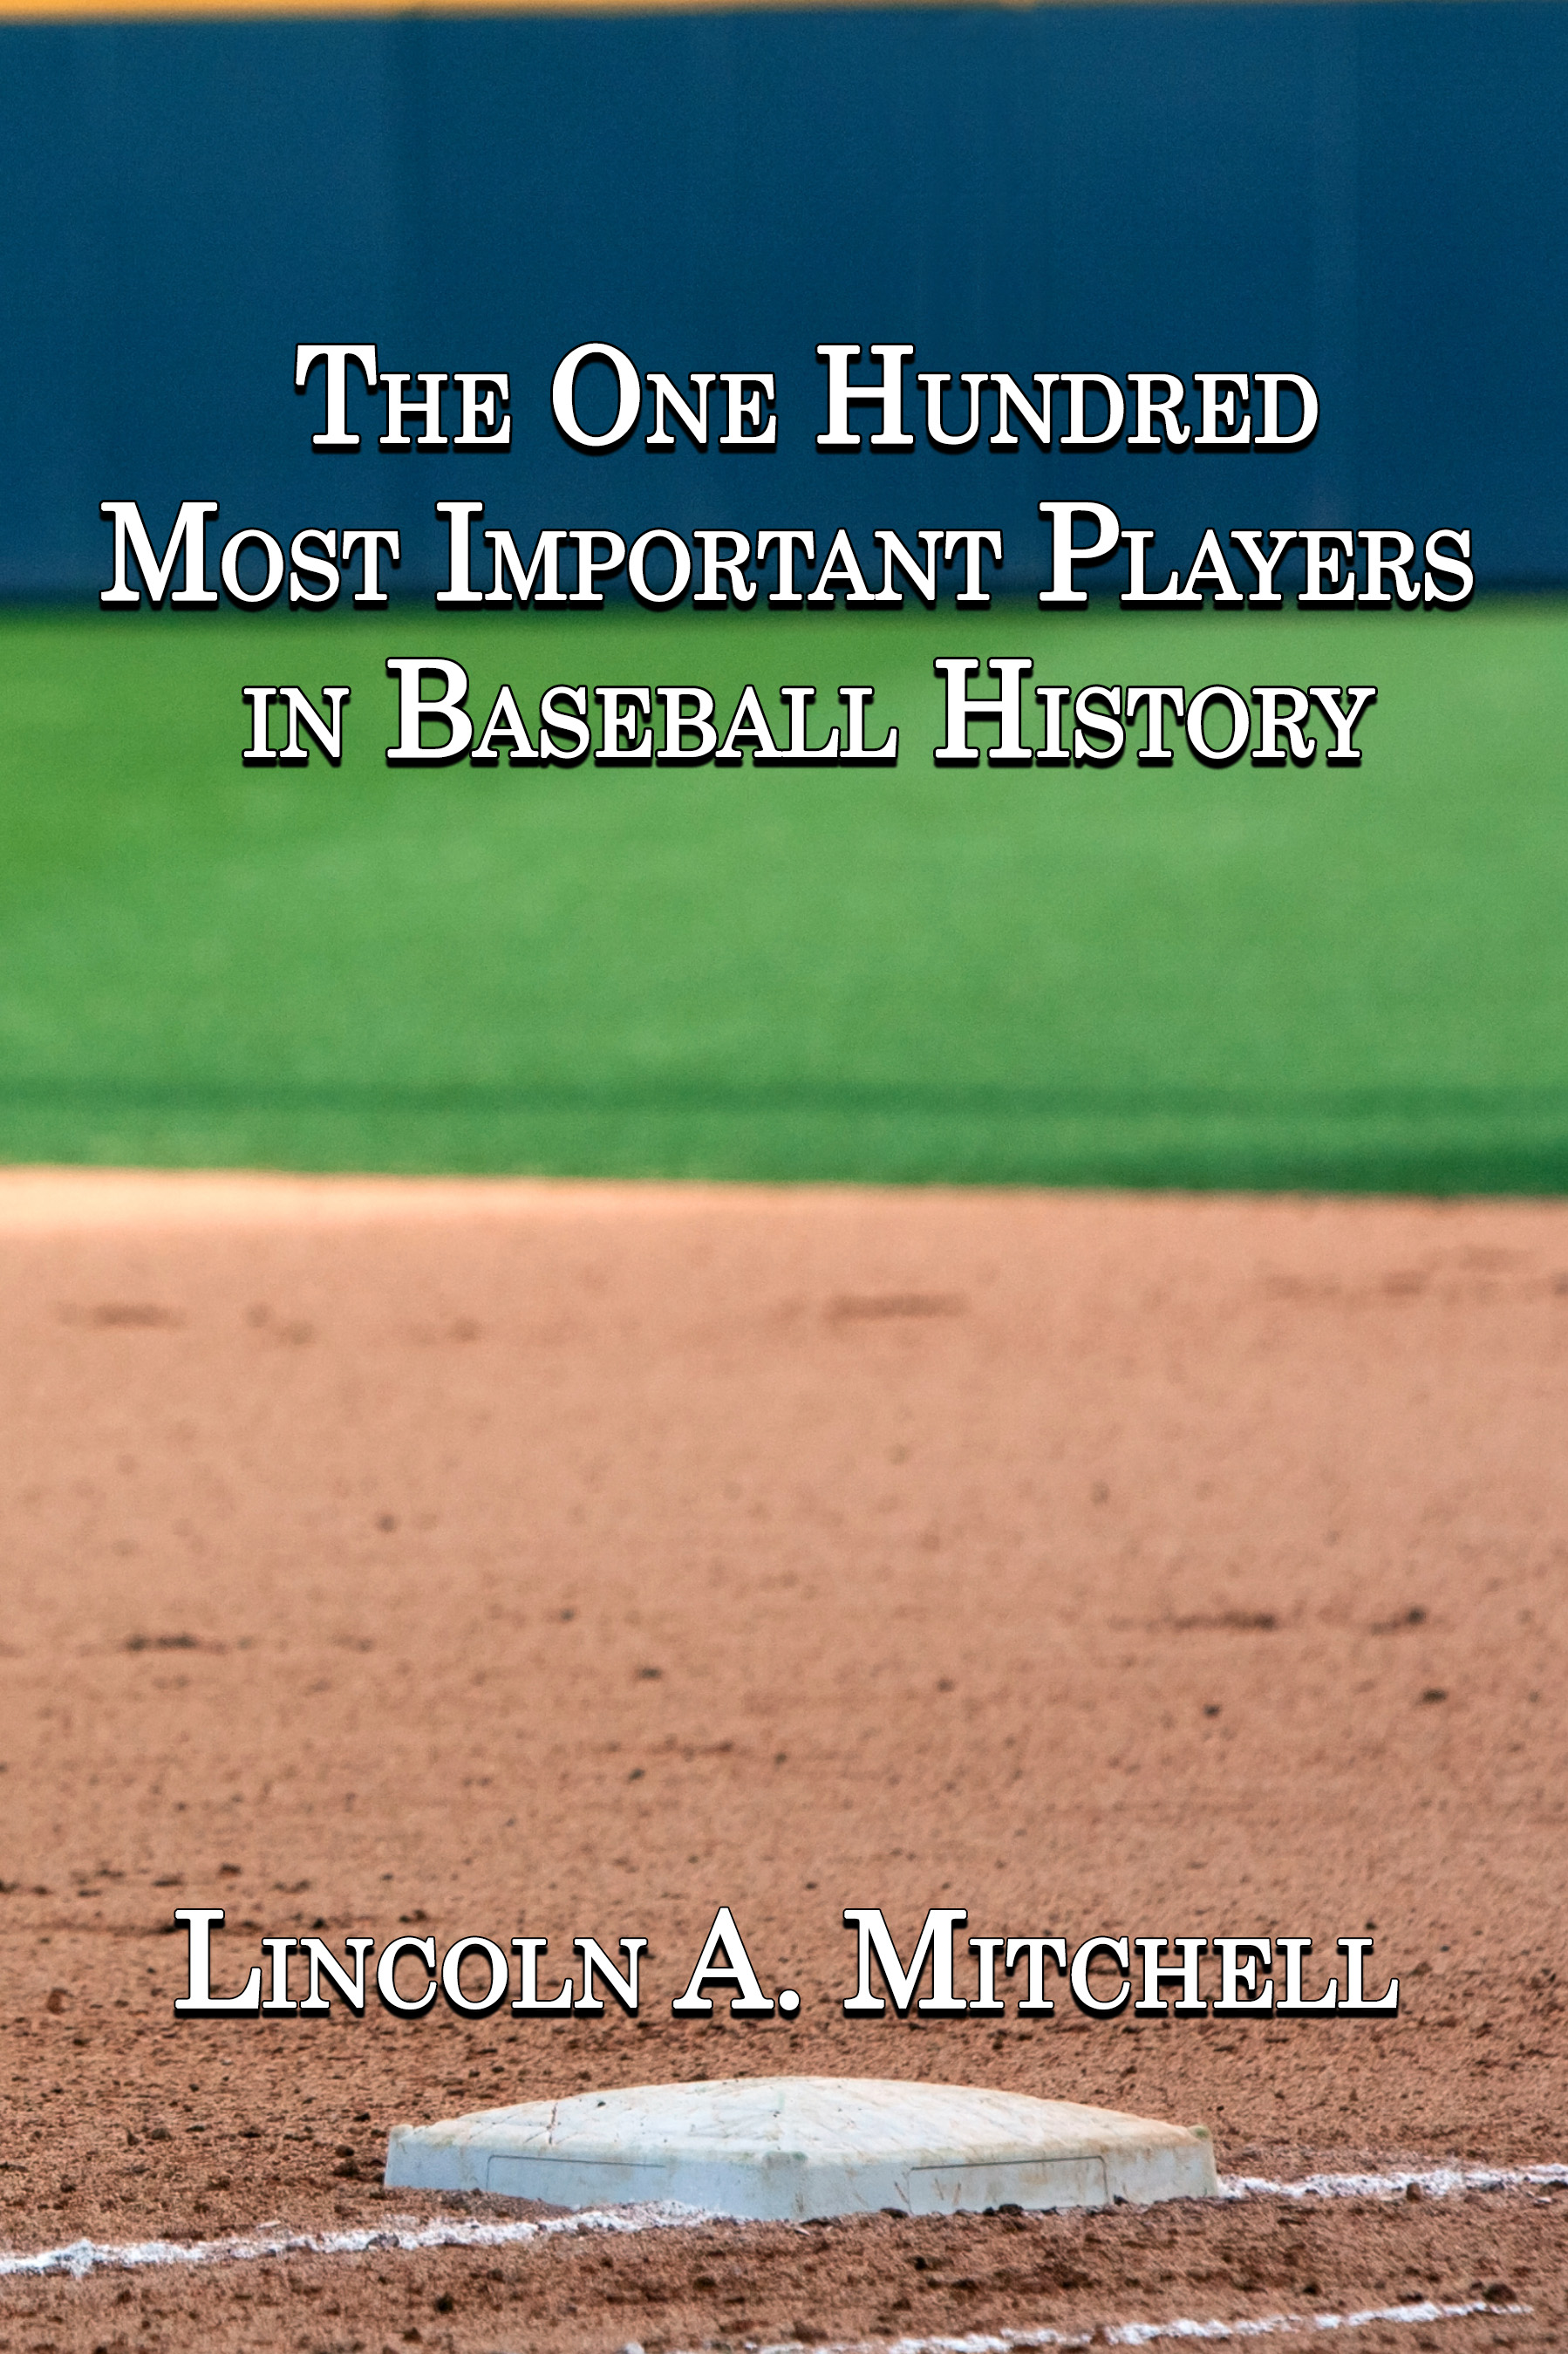 The One Hundred Most Important Players in Baseball History